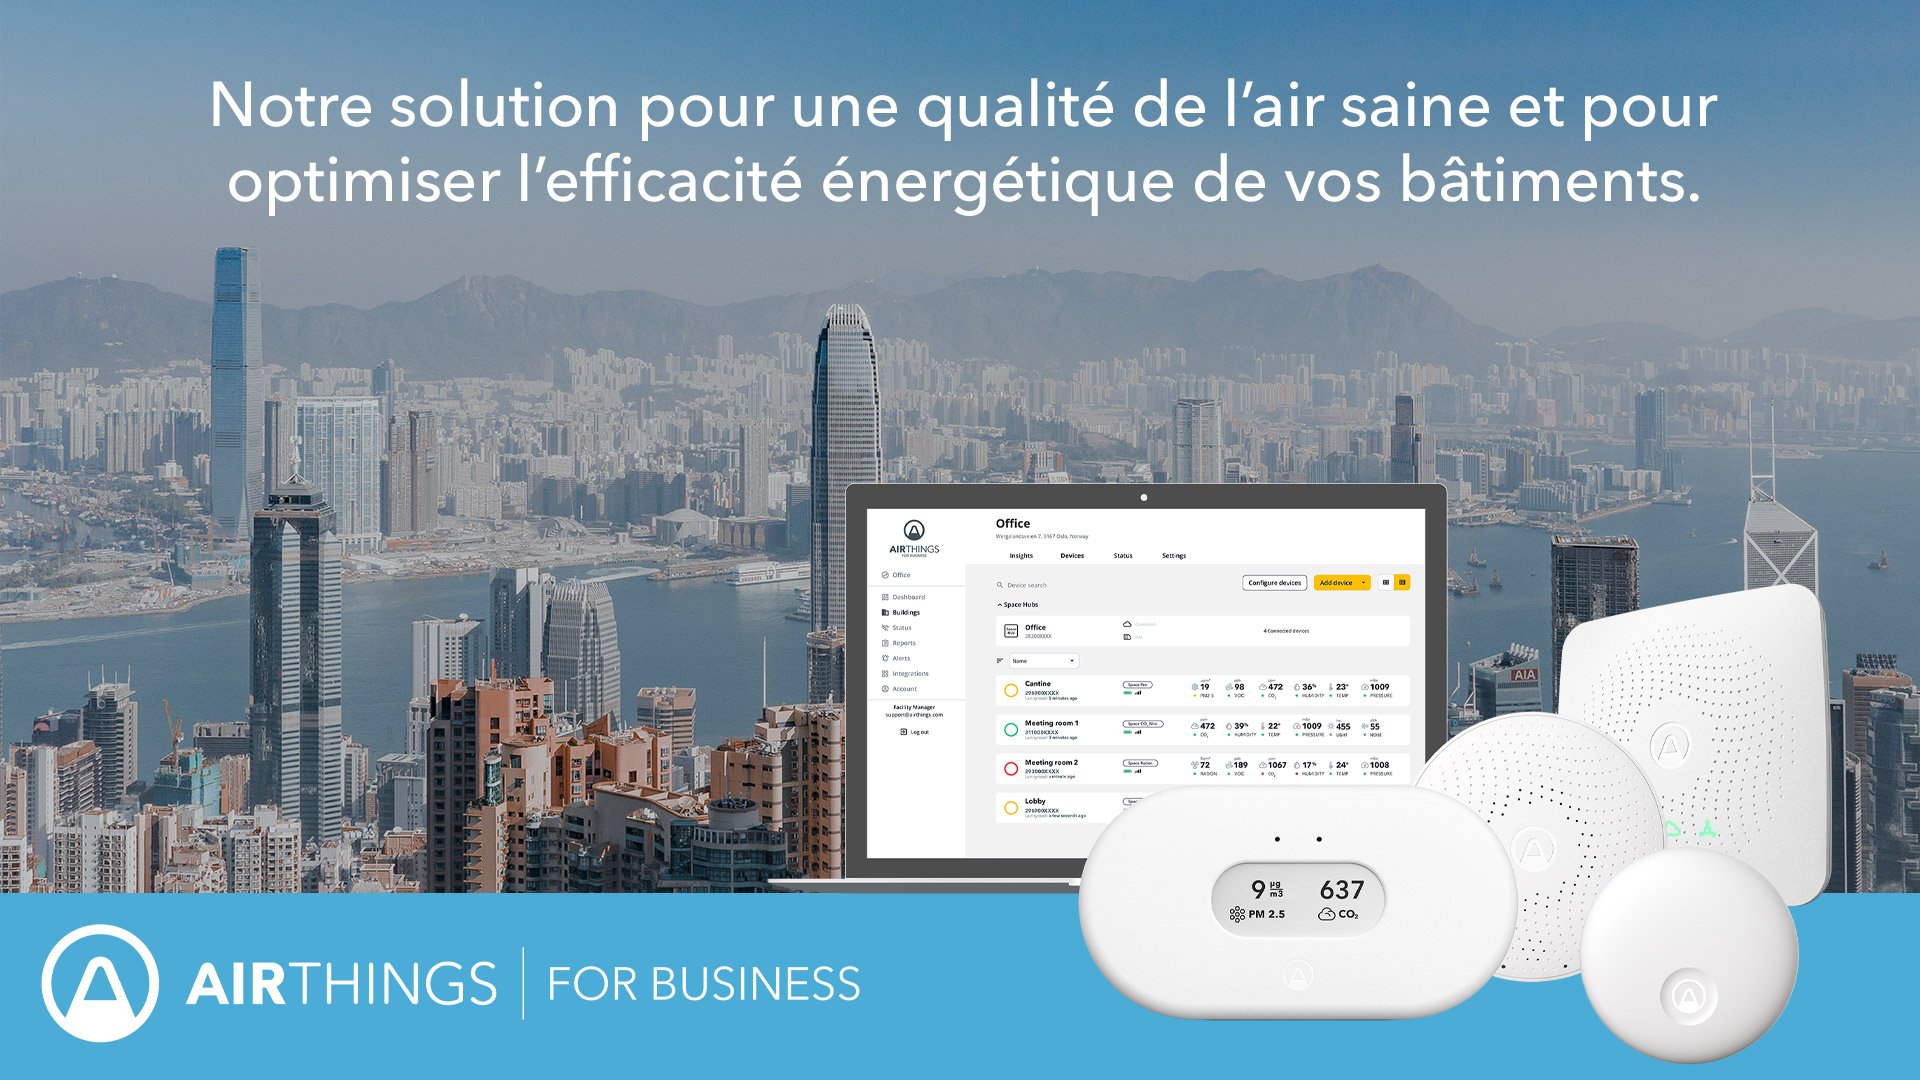 Airthings for Business - 2022 - FR - THUMBNAIL